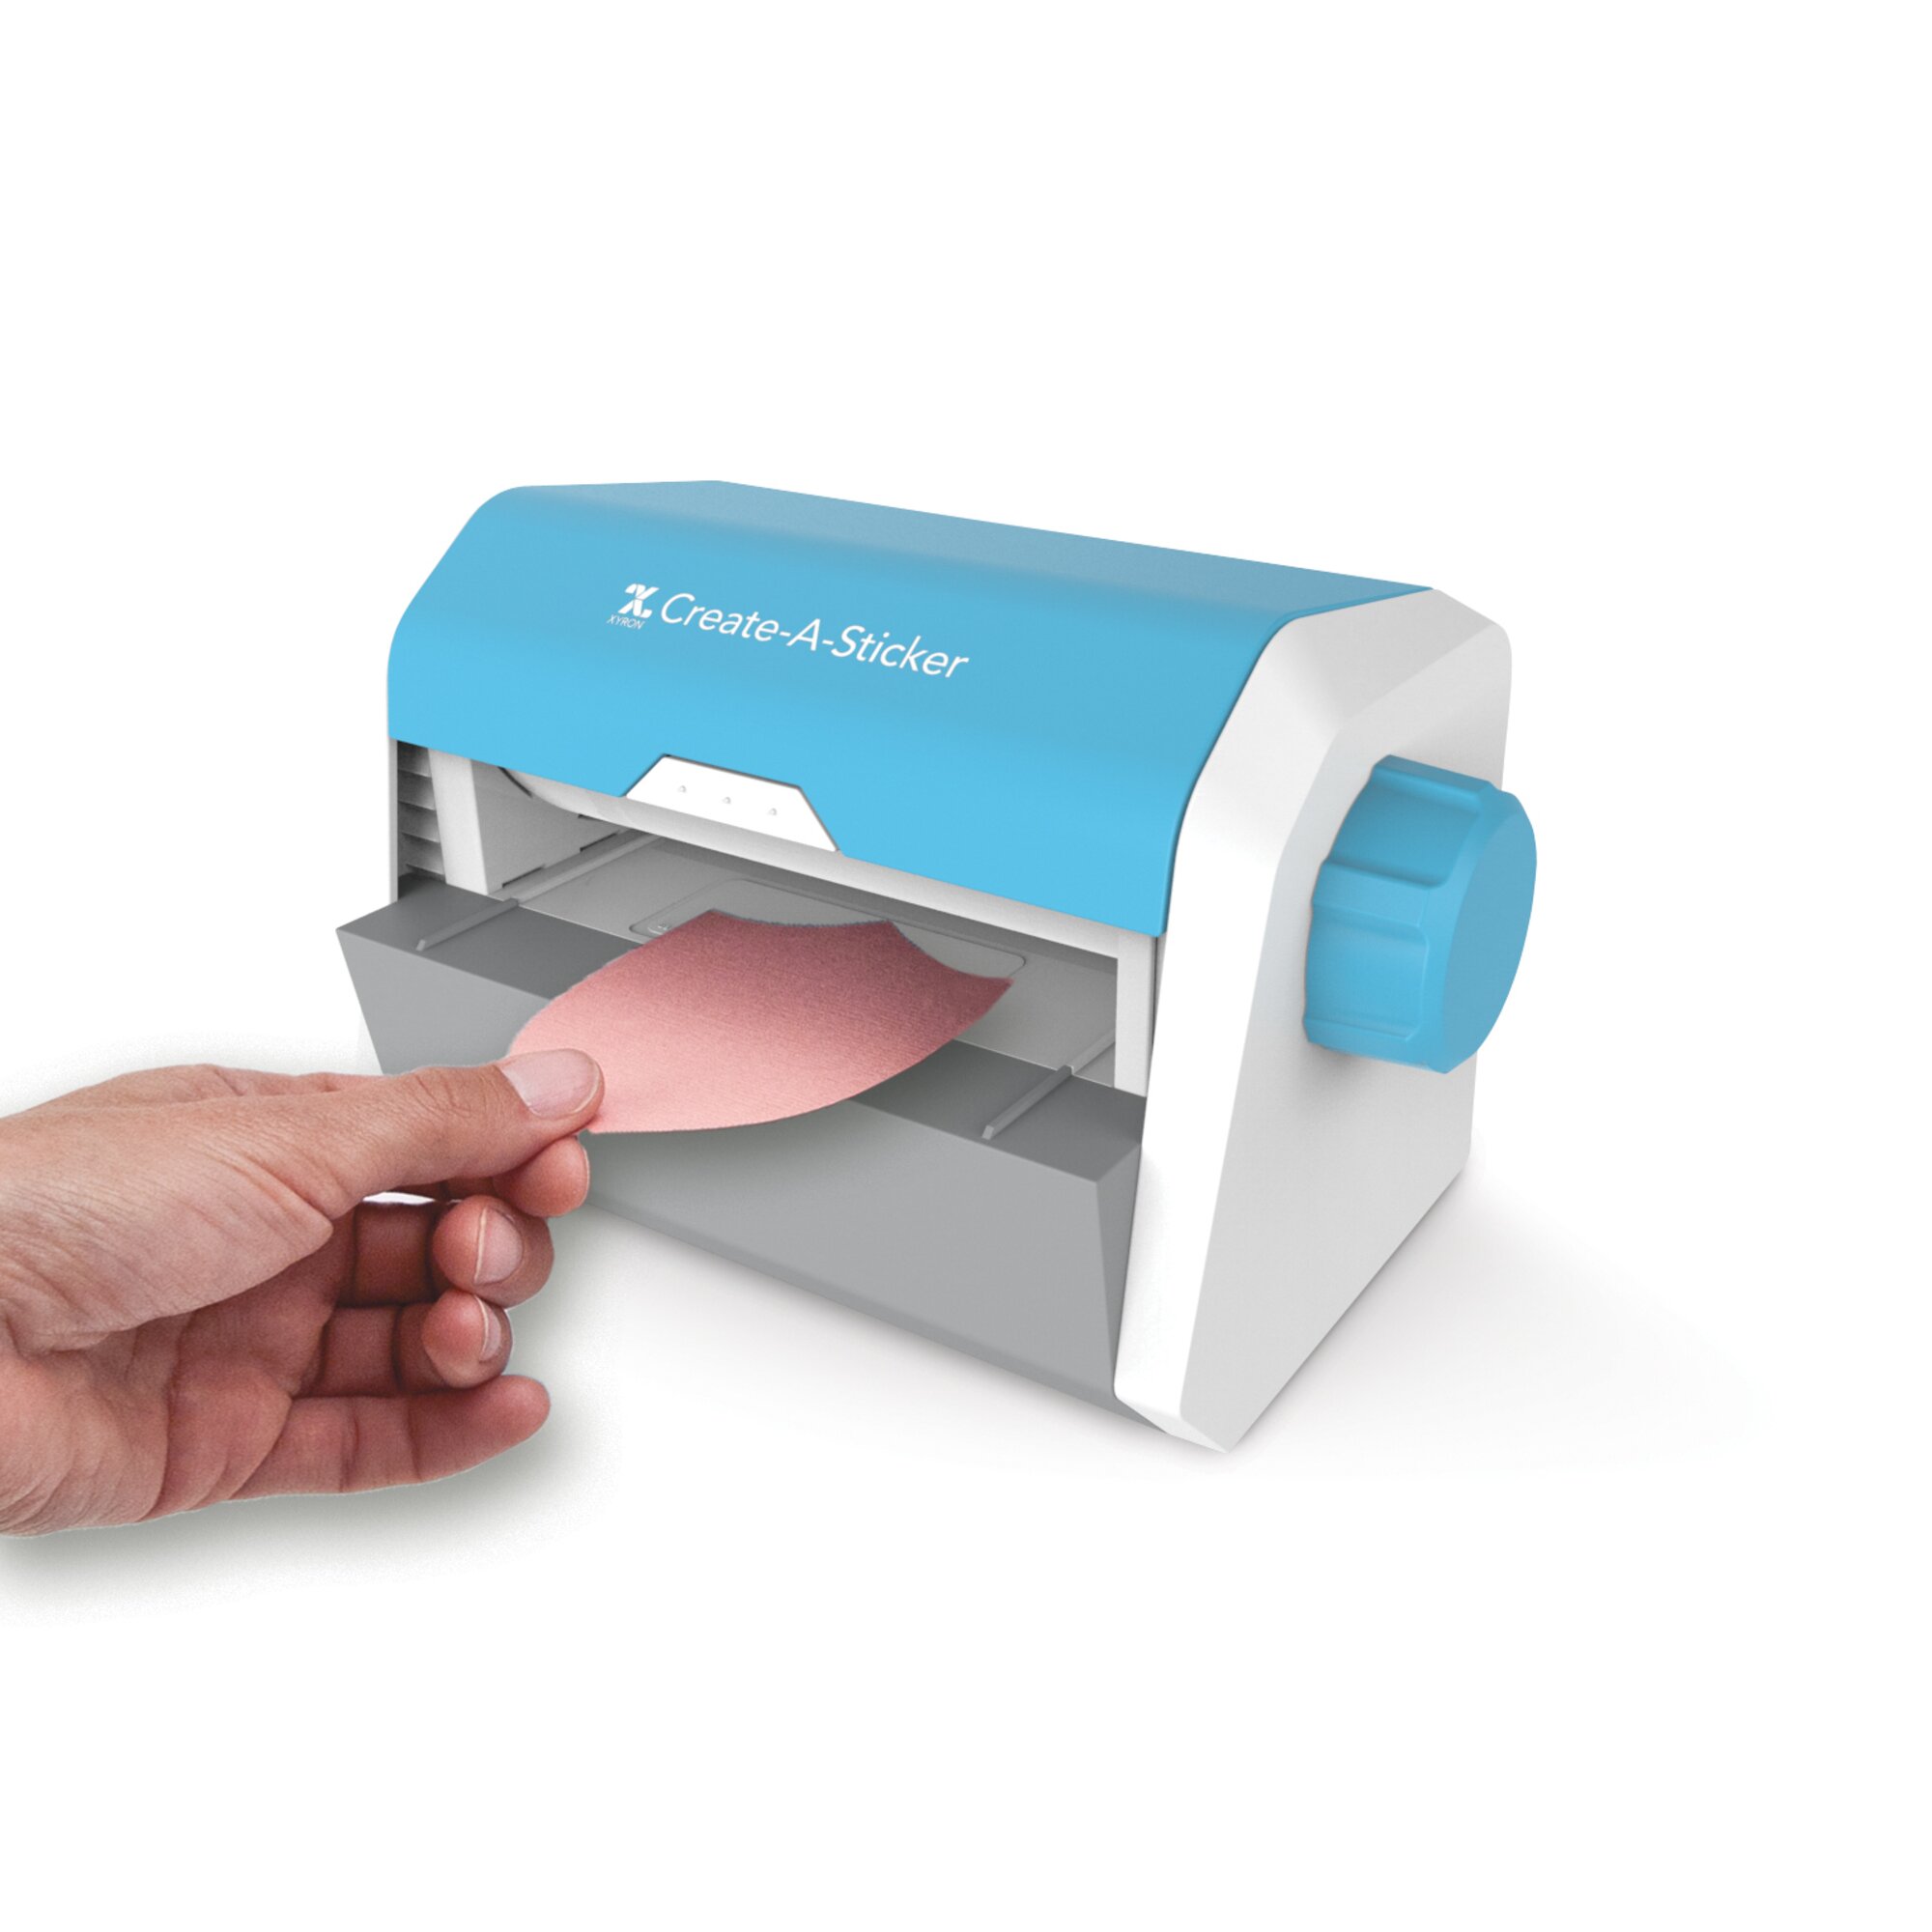 Xyron Create-a-Sticker Maker with Permanent Adhesive Cartridge